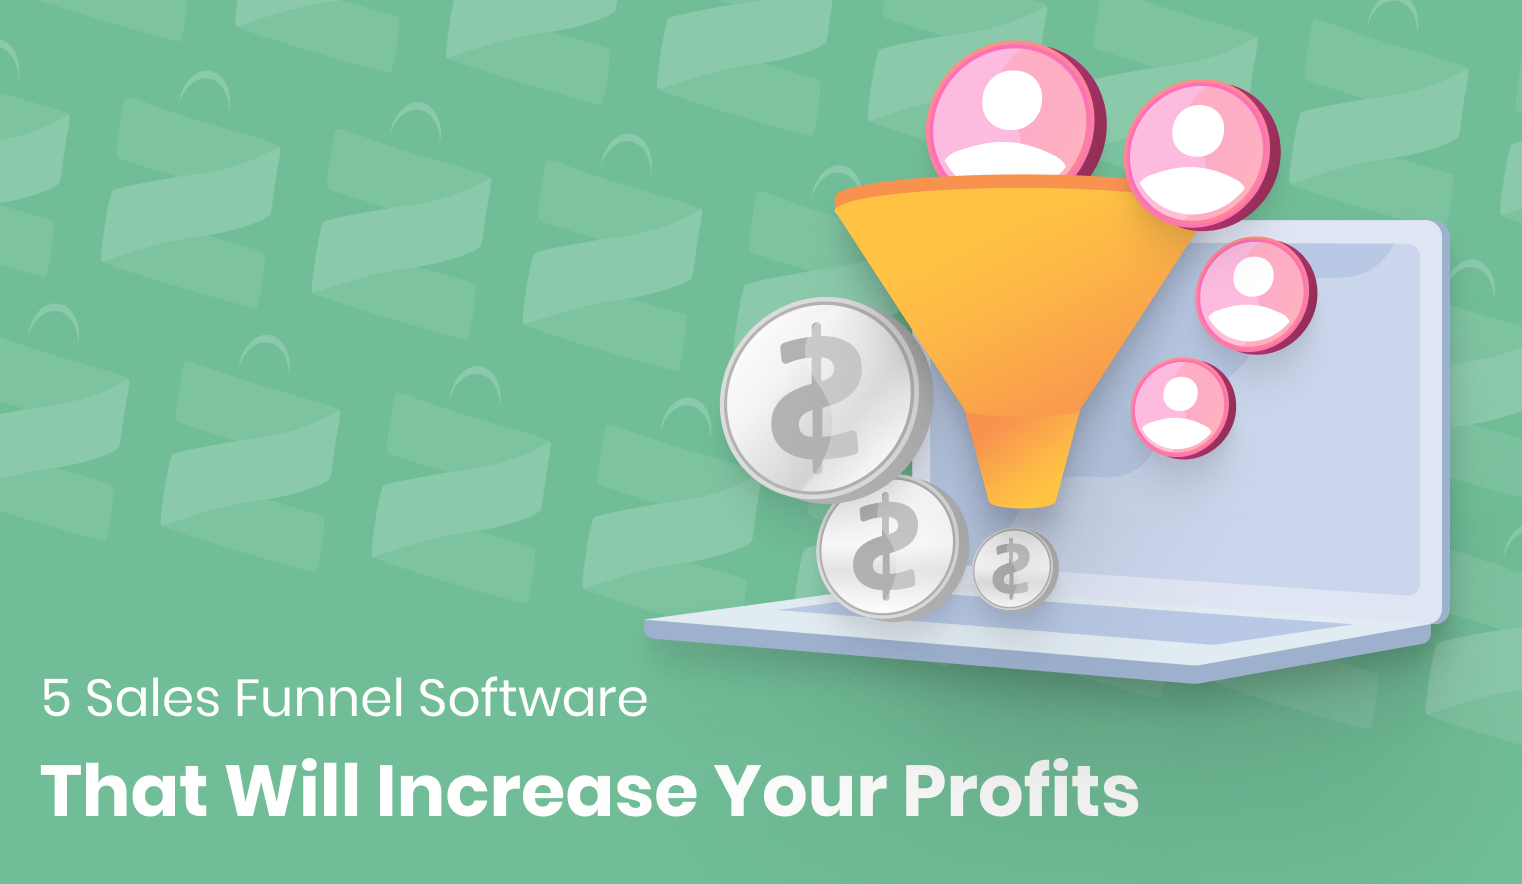 5 Sales Funnel Software That Will Increase Your Profits